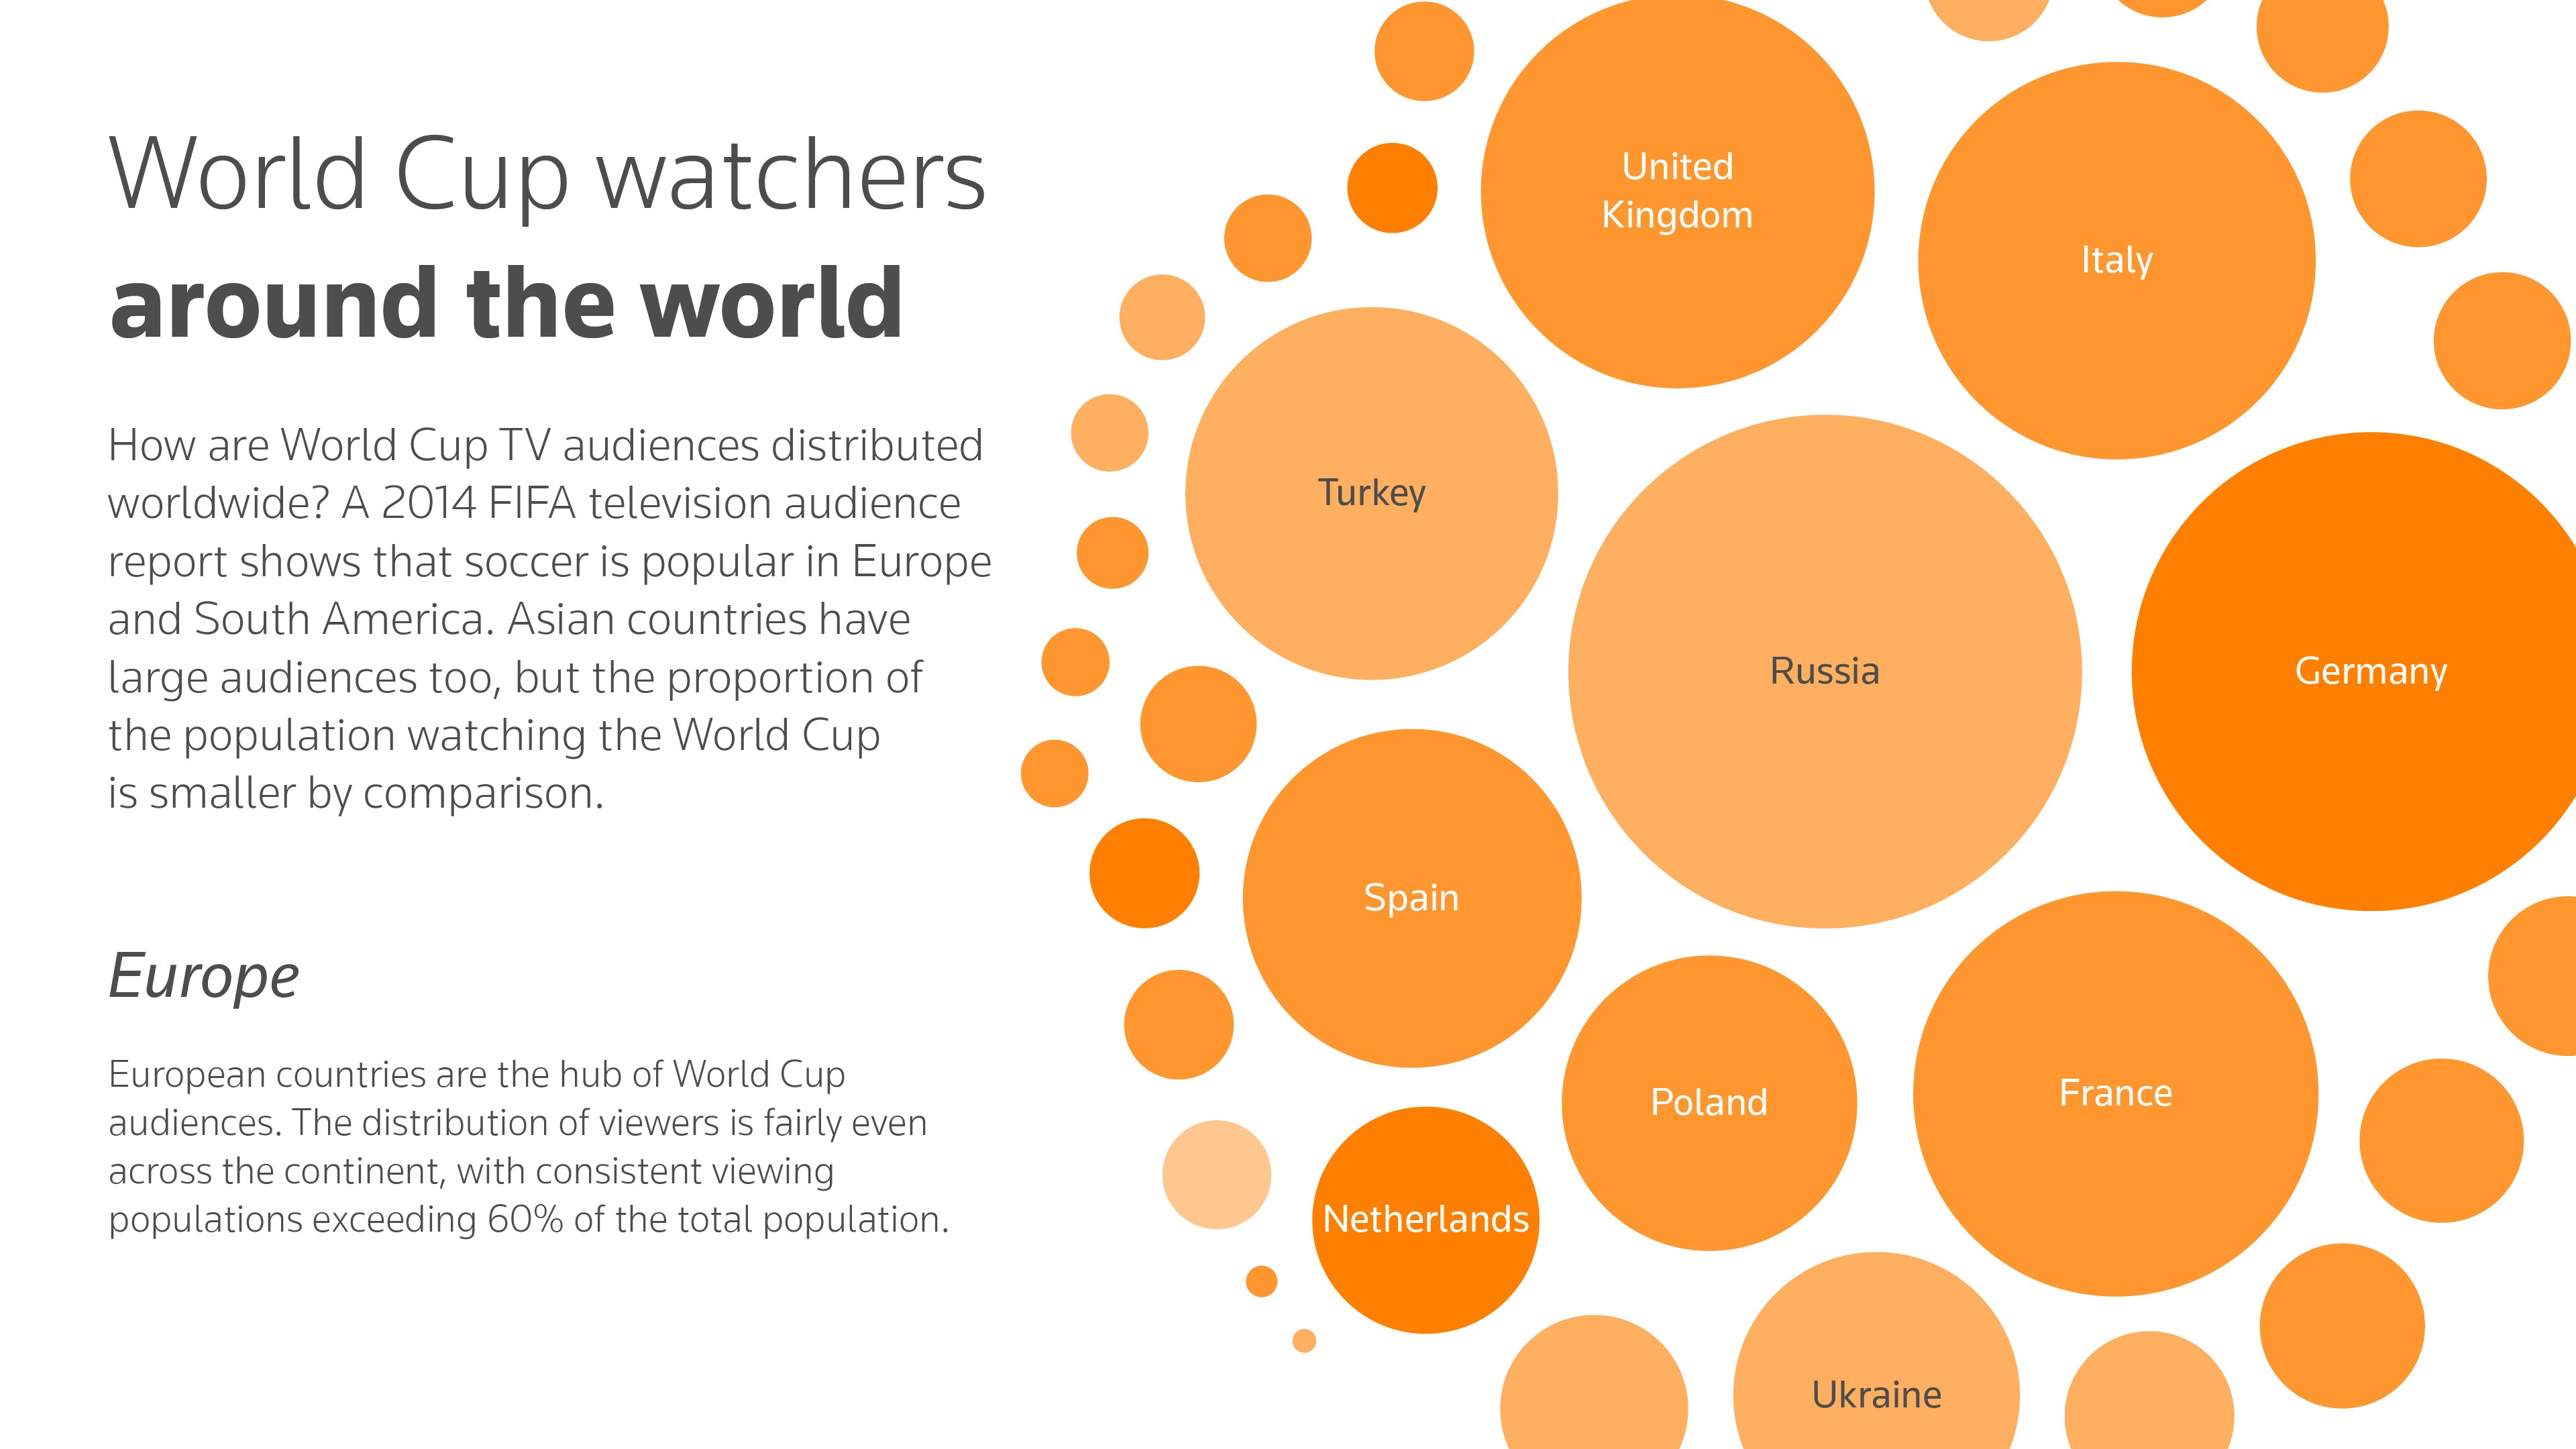 Infographic from Thomson Reuters Labs showing World Cup TV audiences spread around the world.